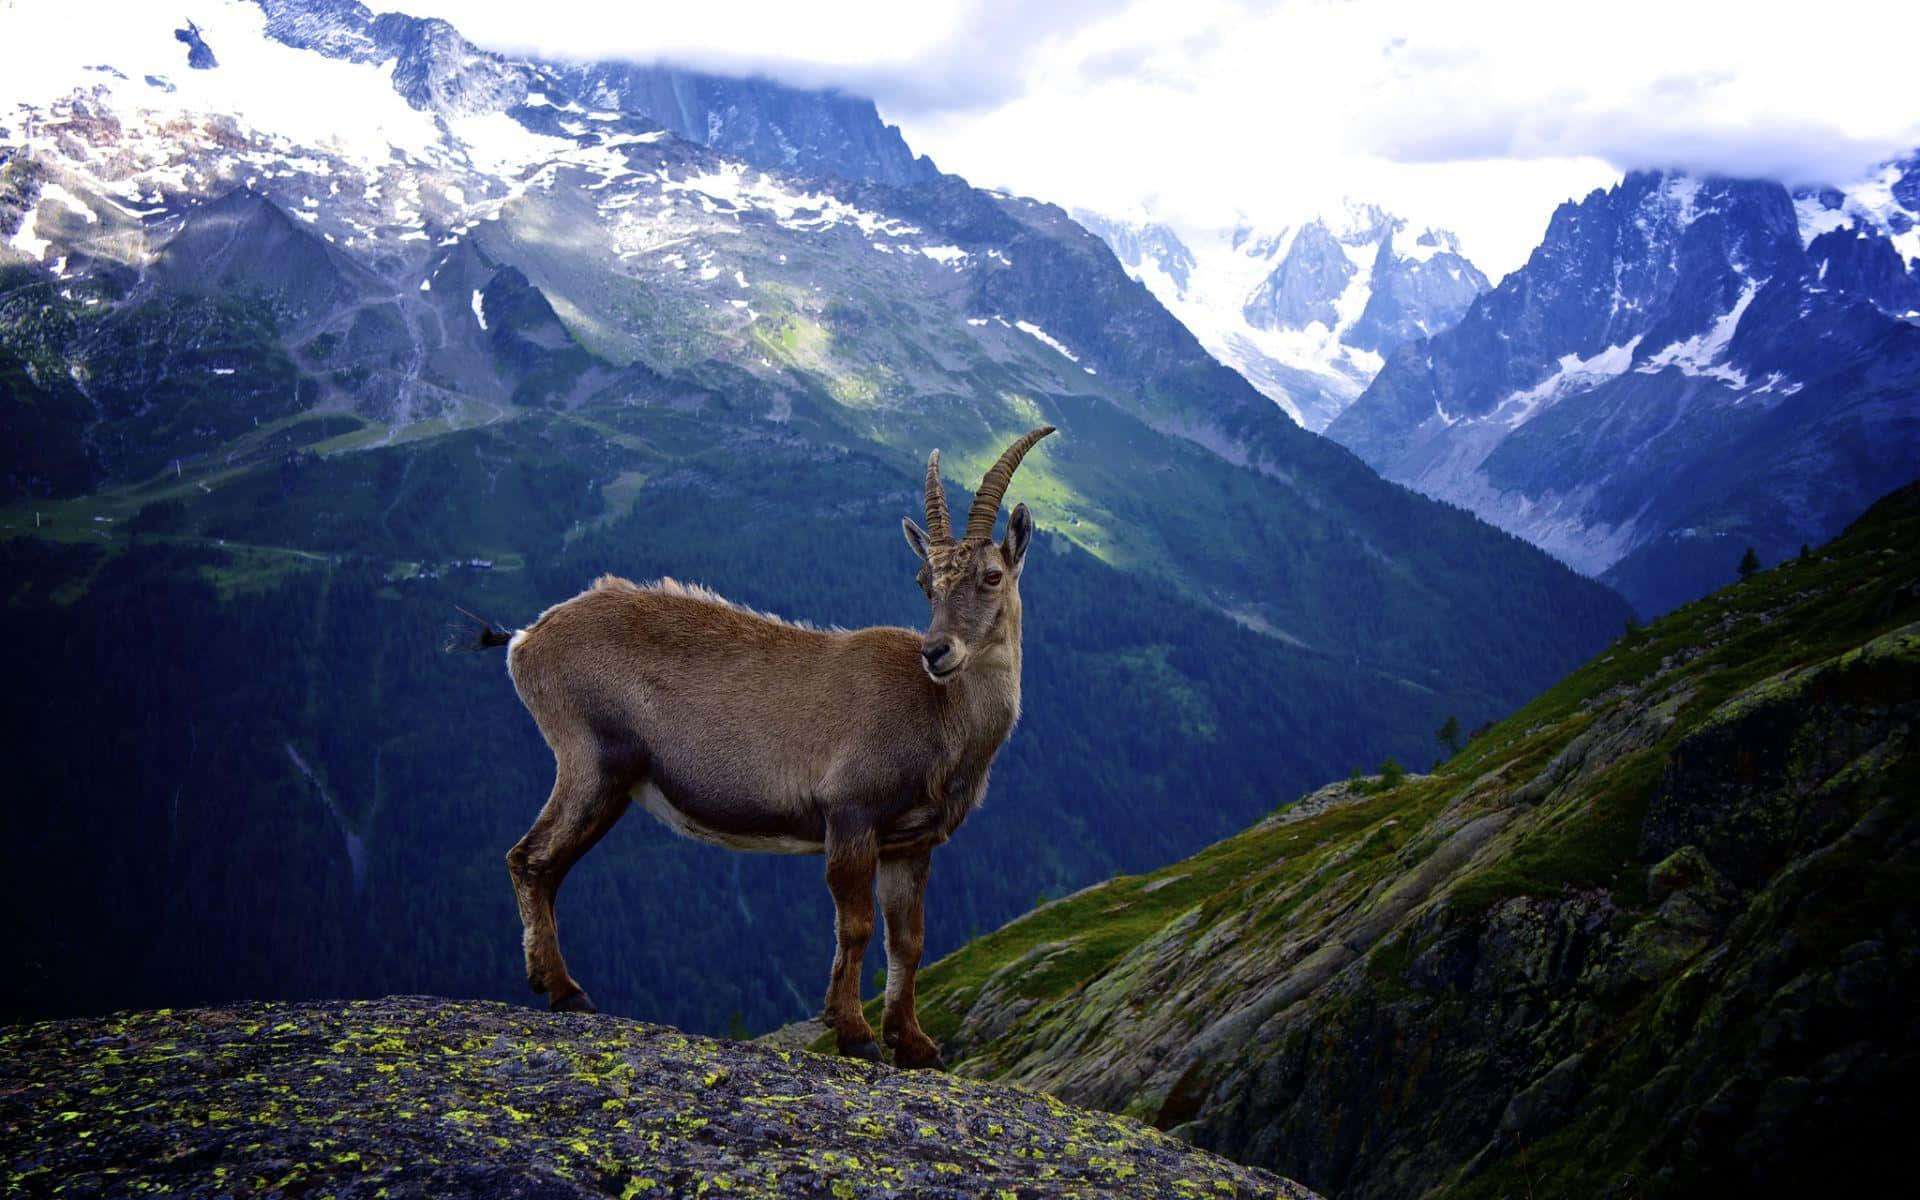 A Goat Standing On Top Of A Mountain With Mountains In The Background